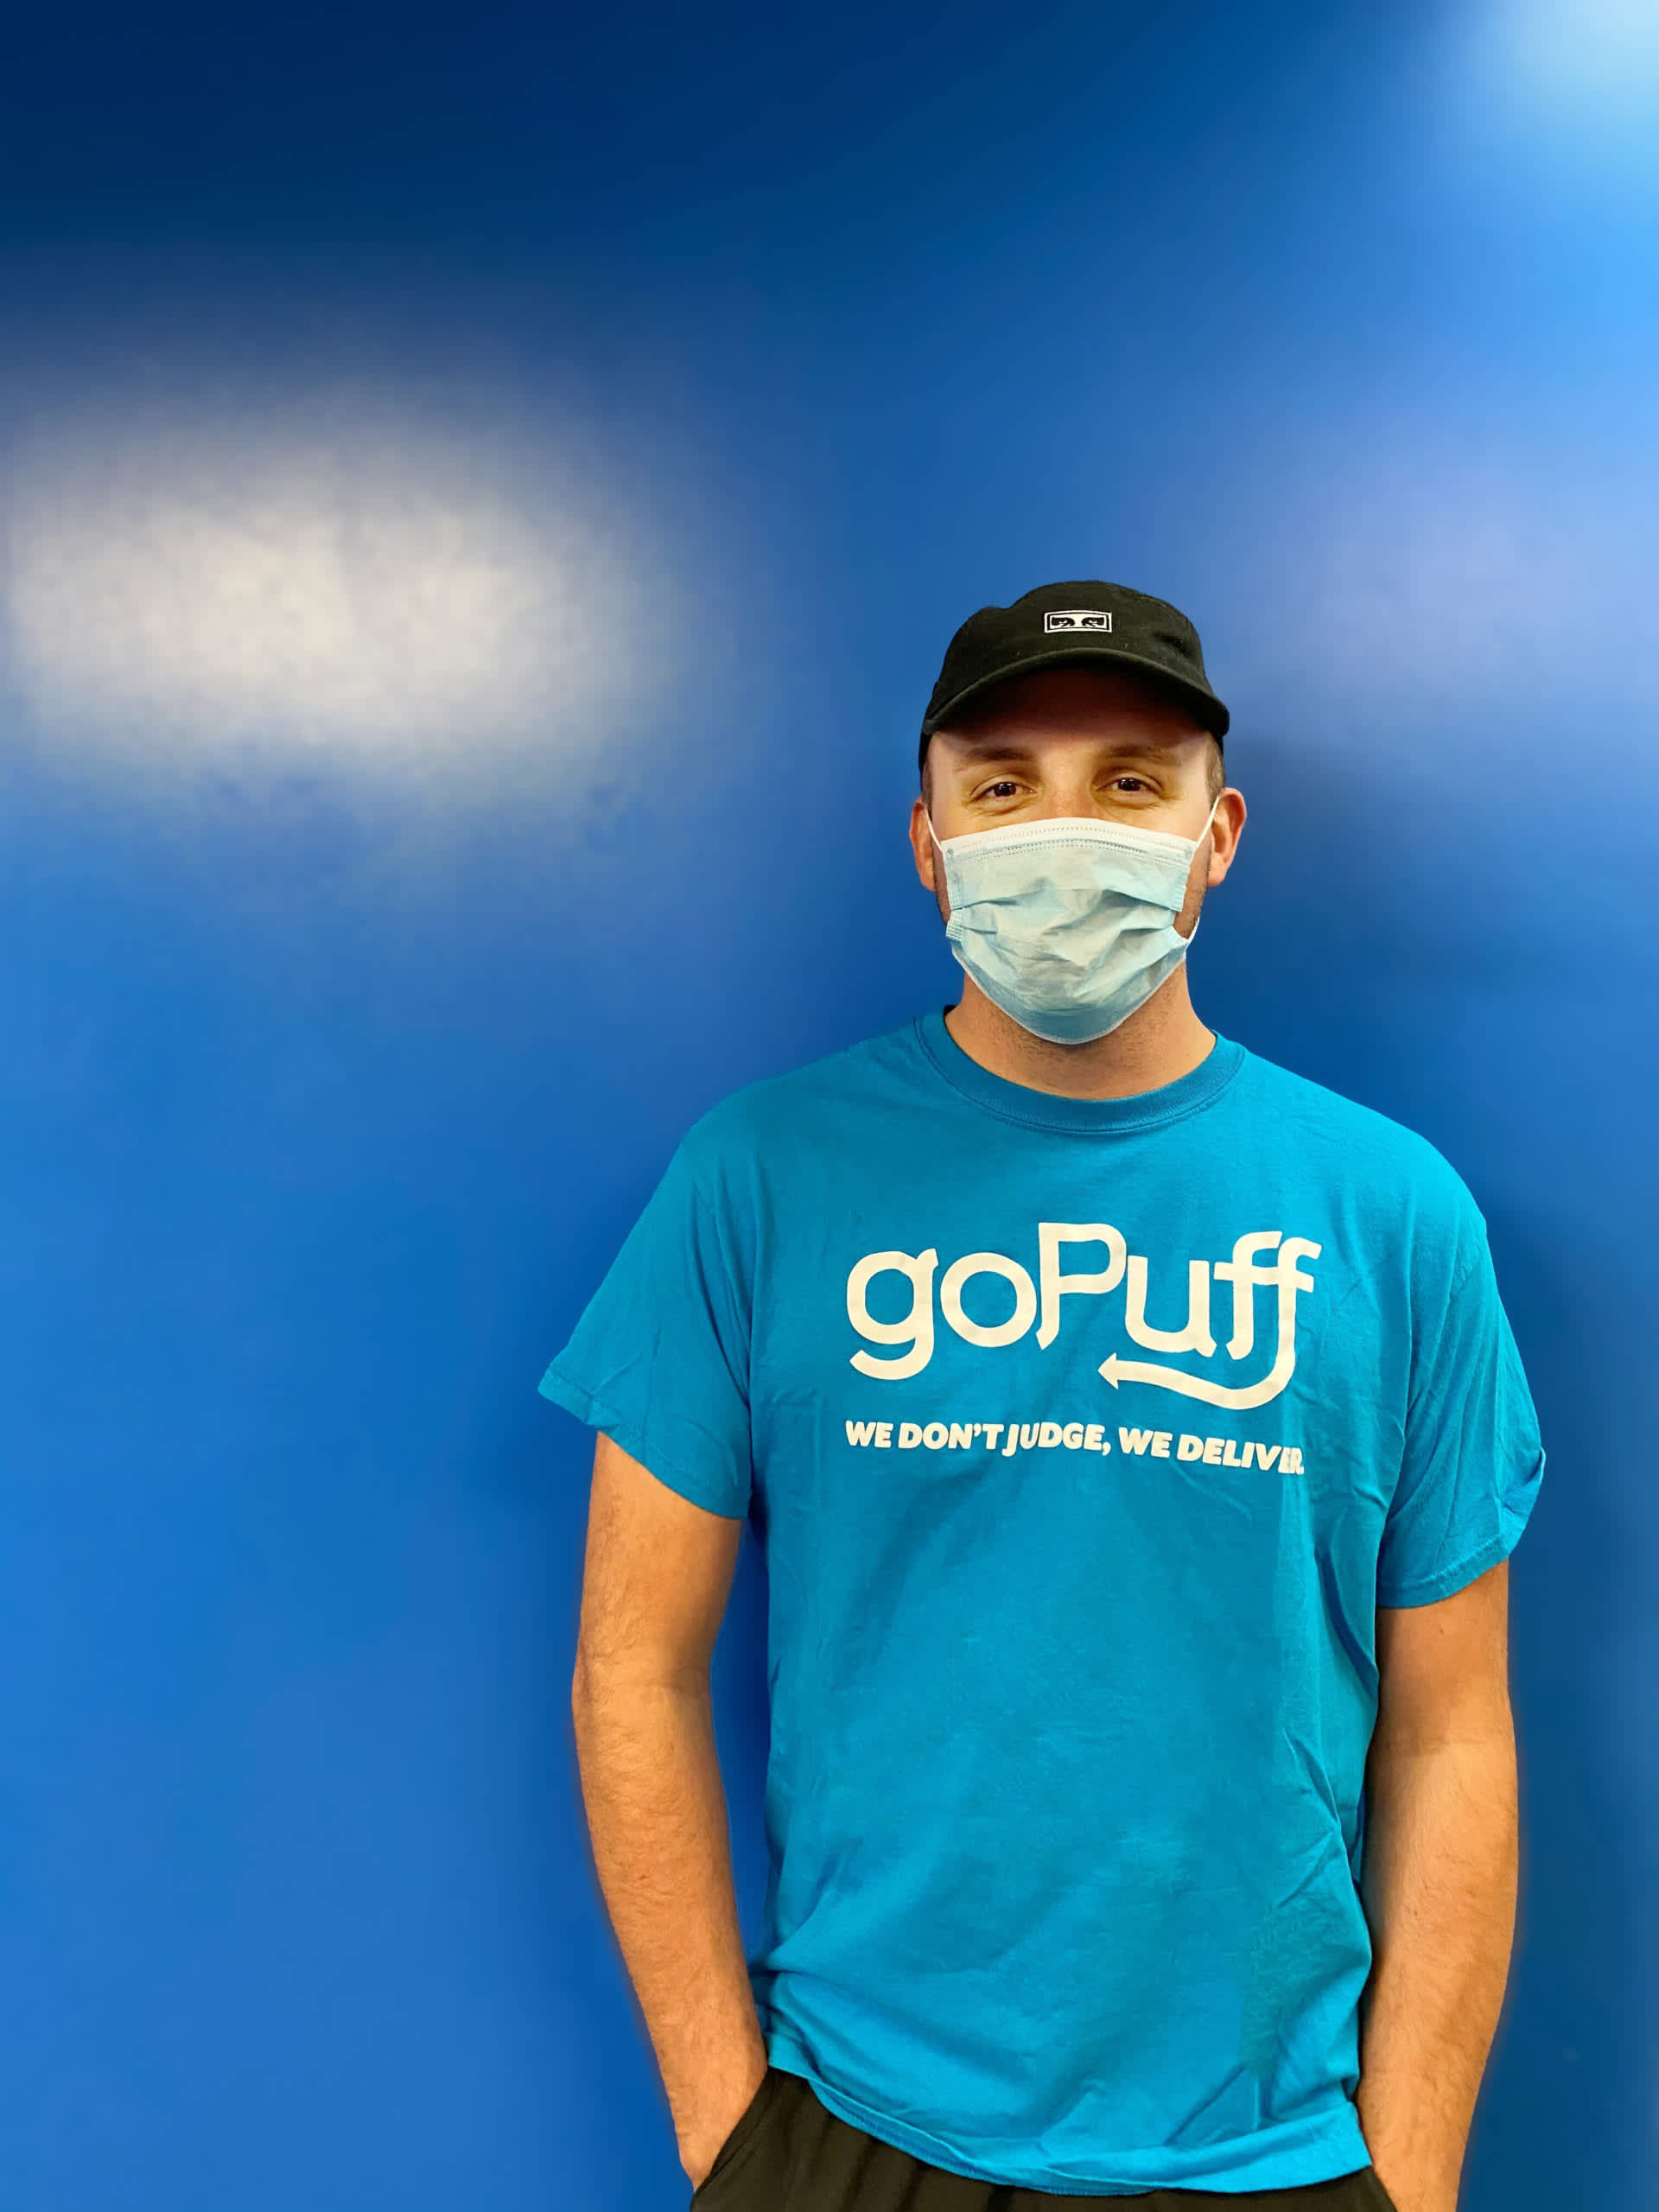 Gopuff Plans to Add Thousands of Jobs Nationwide Amid Covid-19